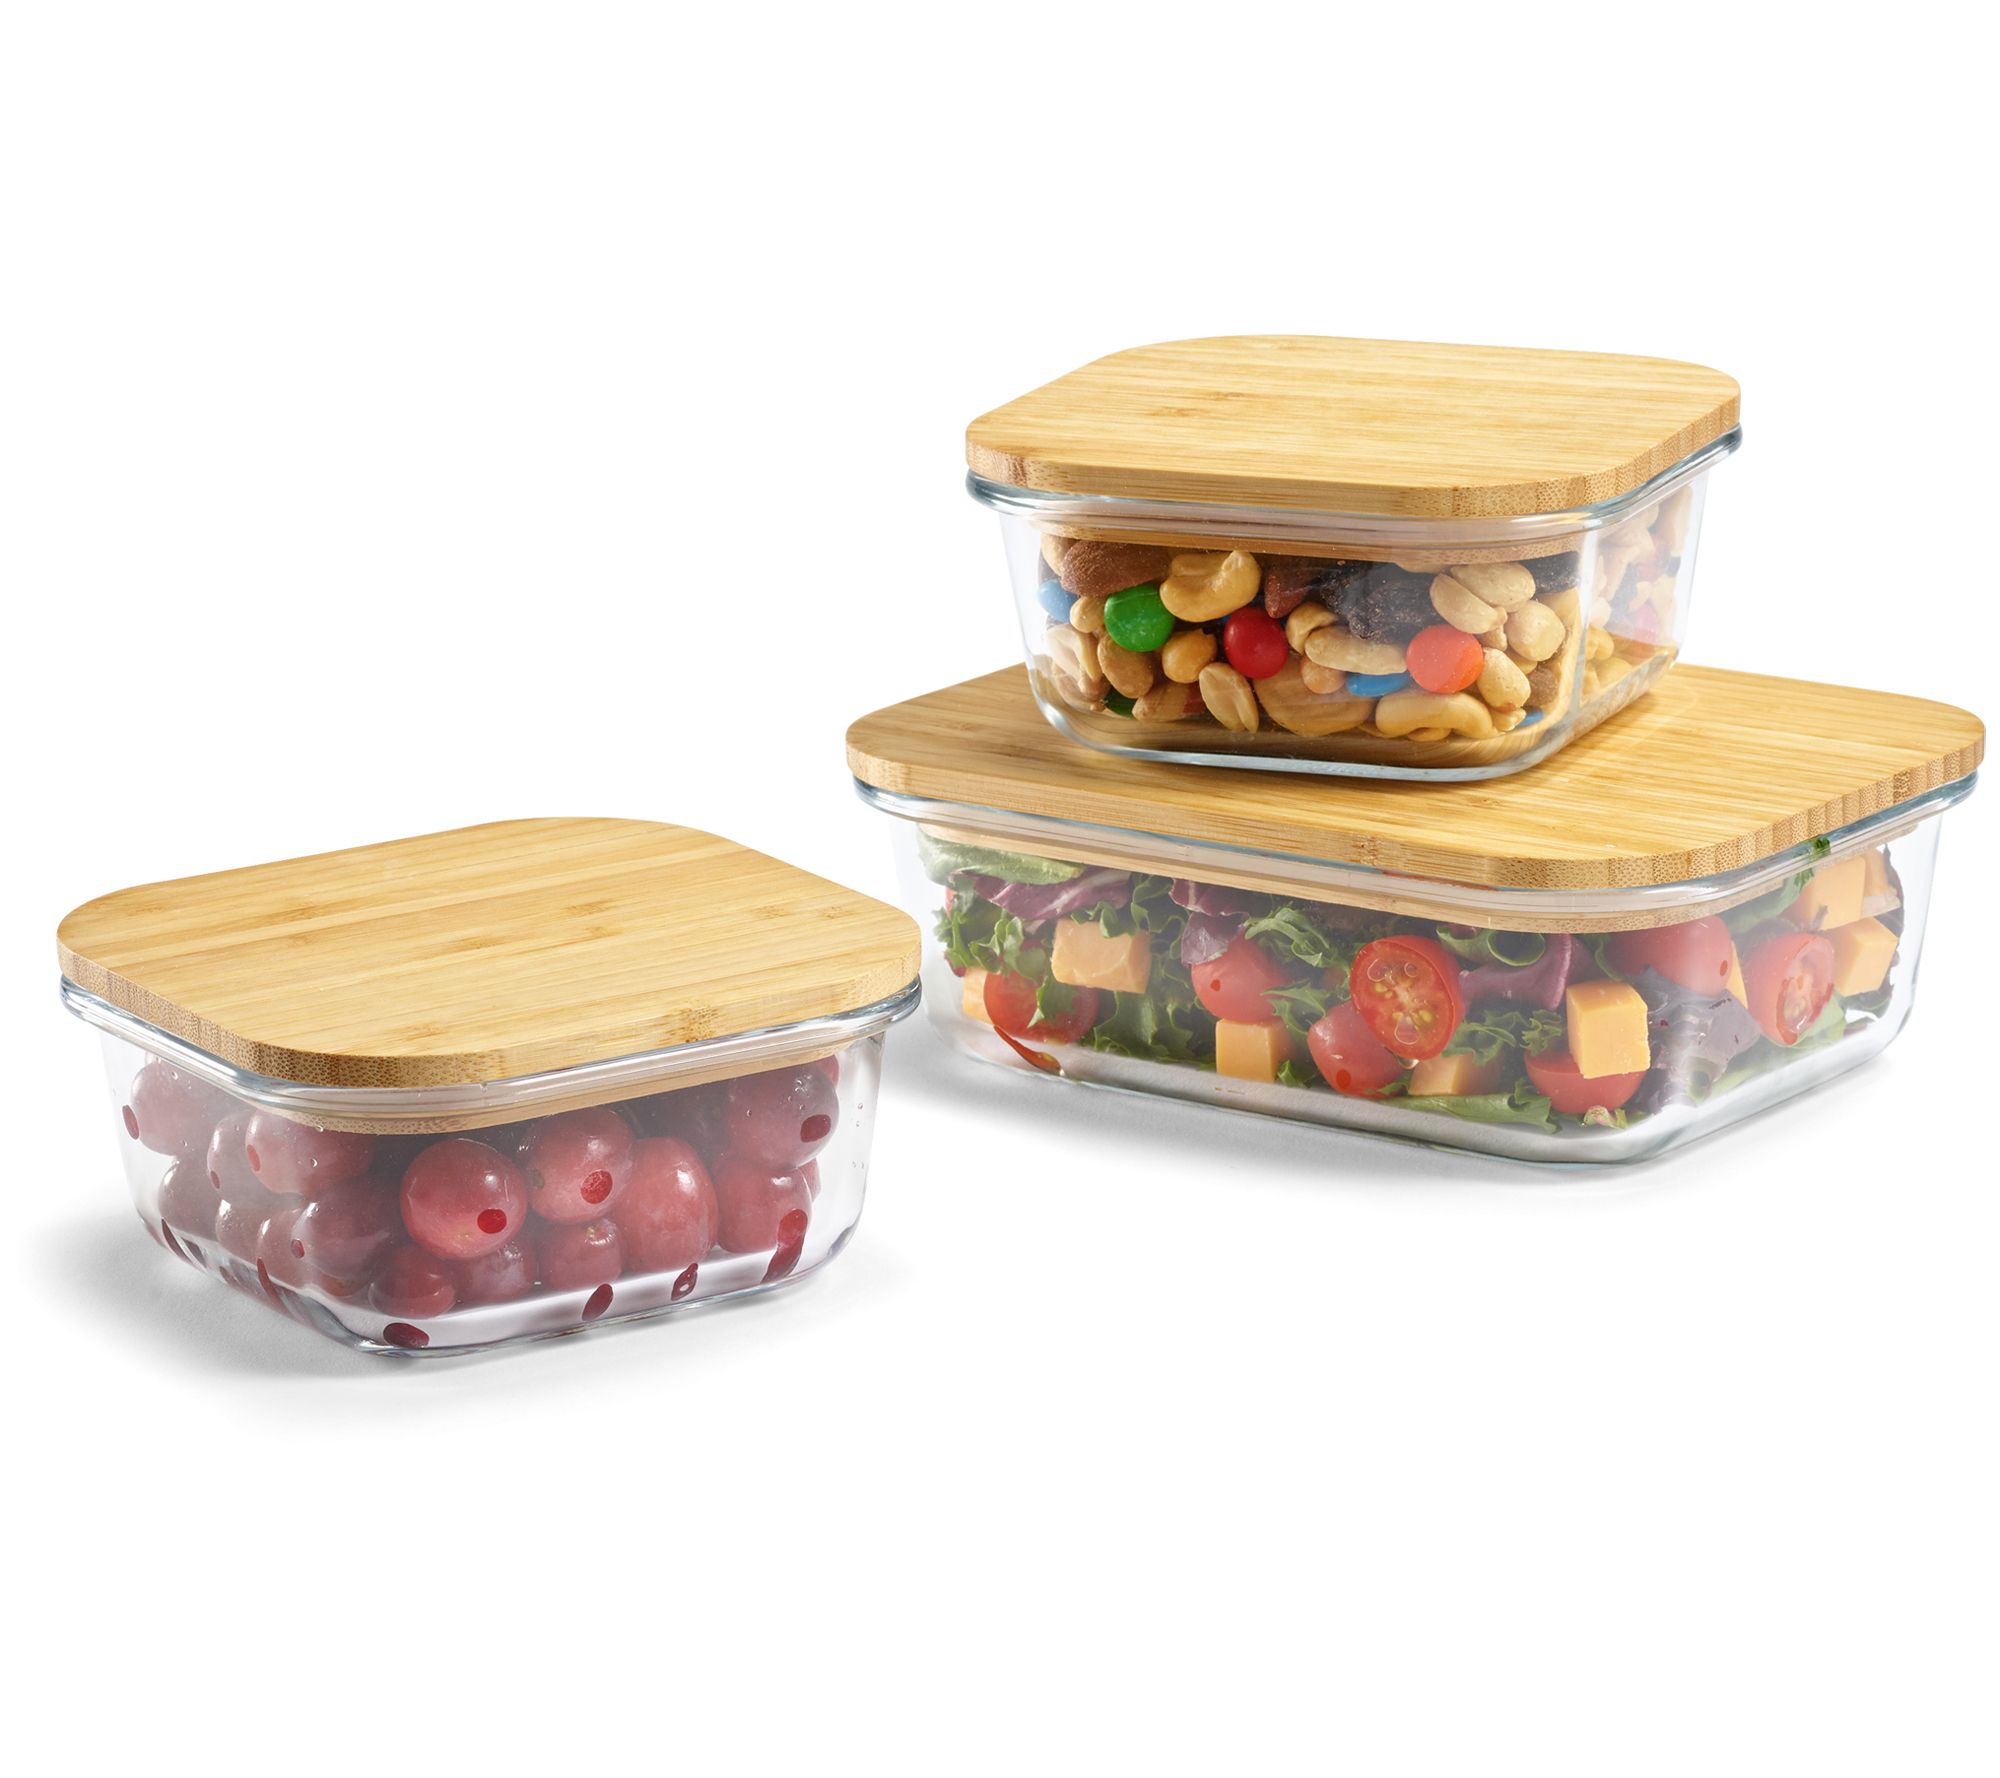 Urban Green Glass Container Bamboo Lids, Food Storage Containers